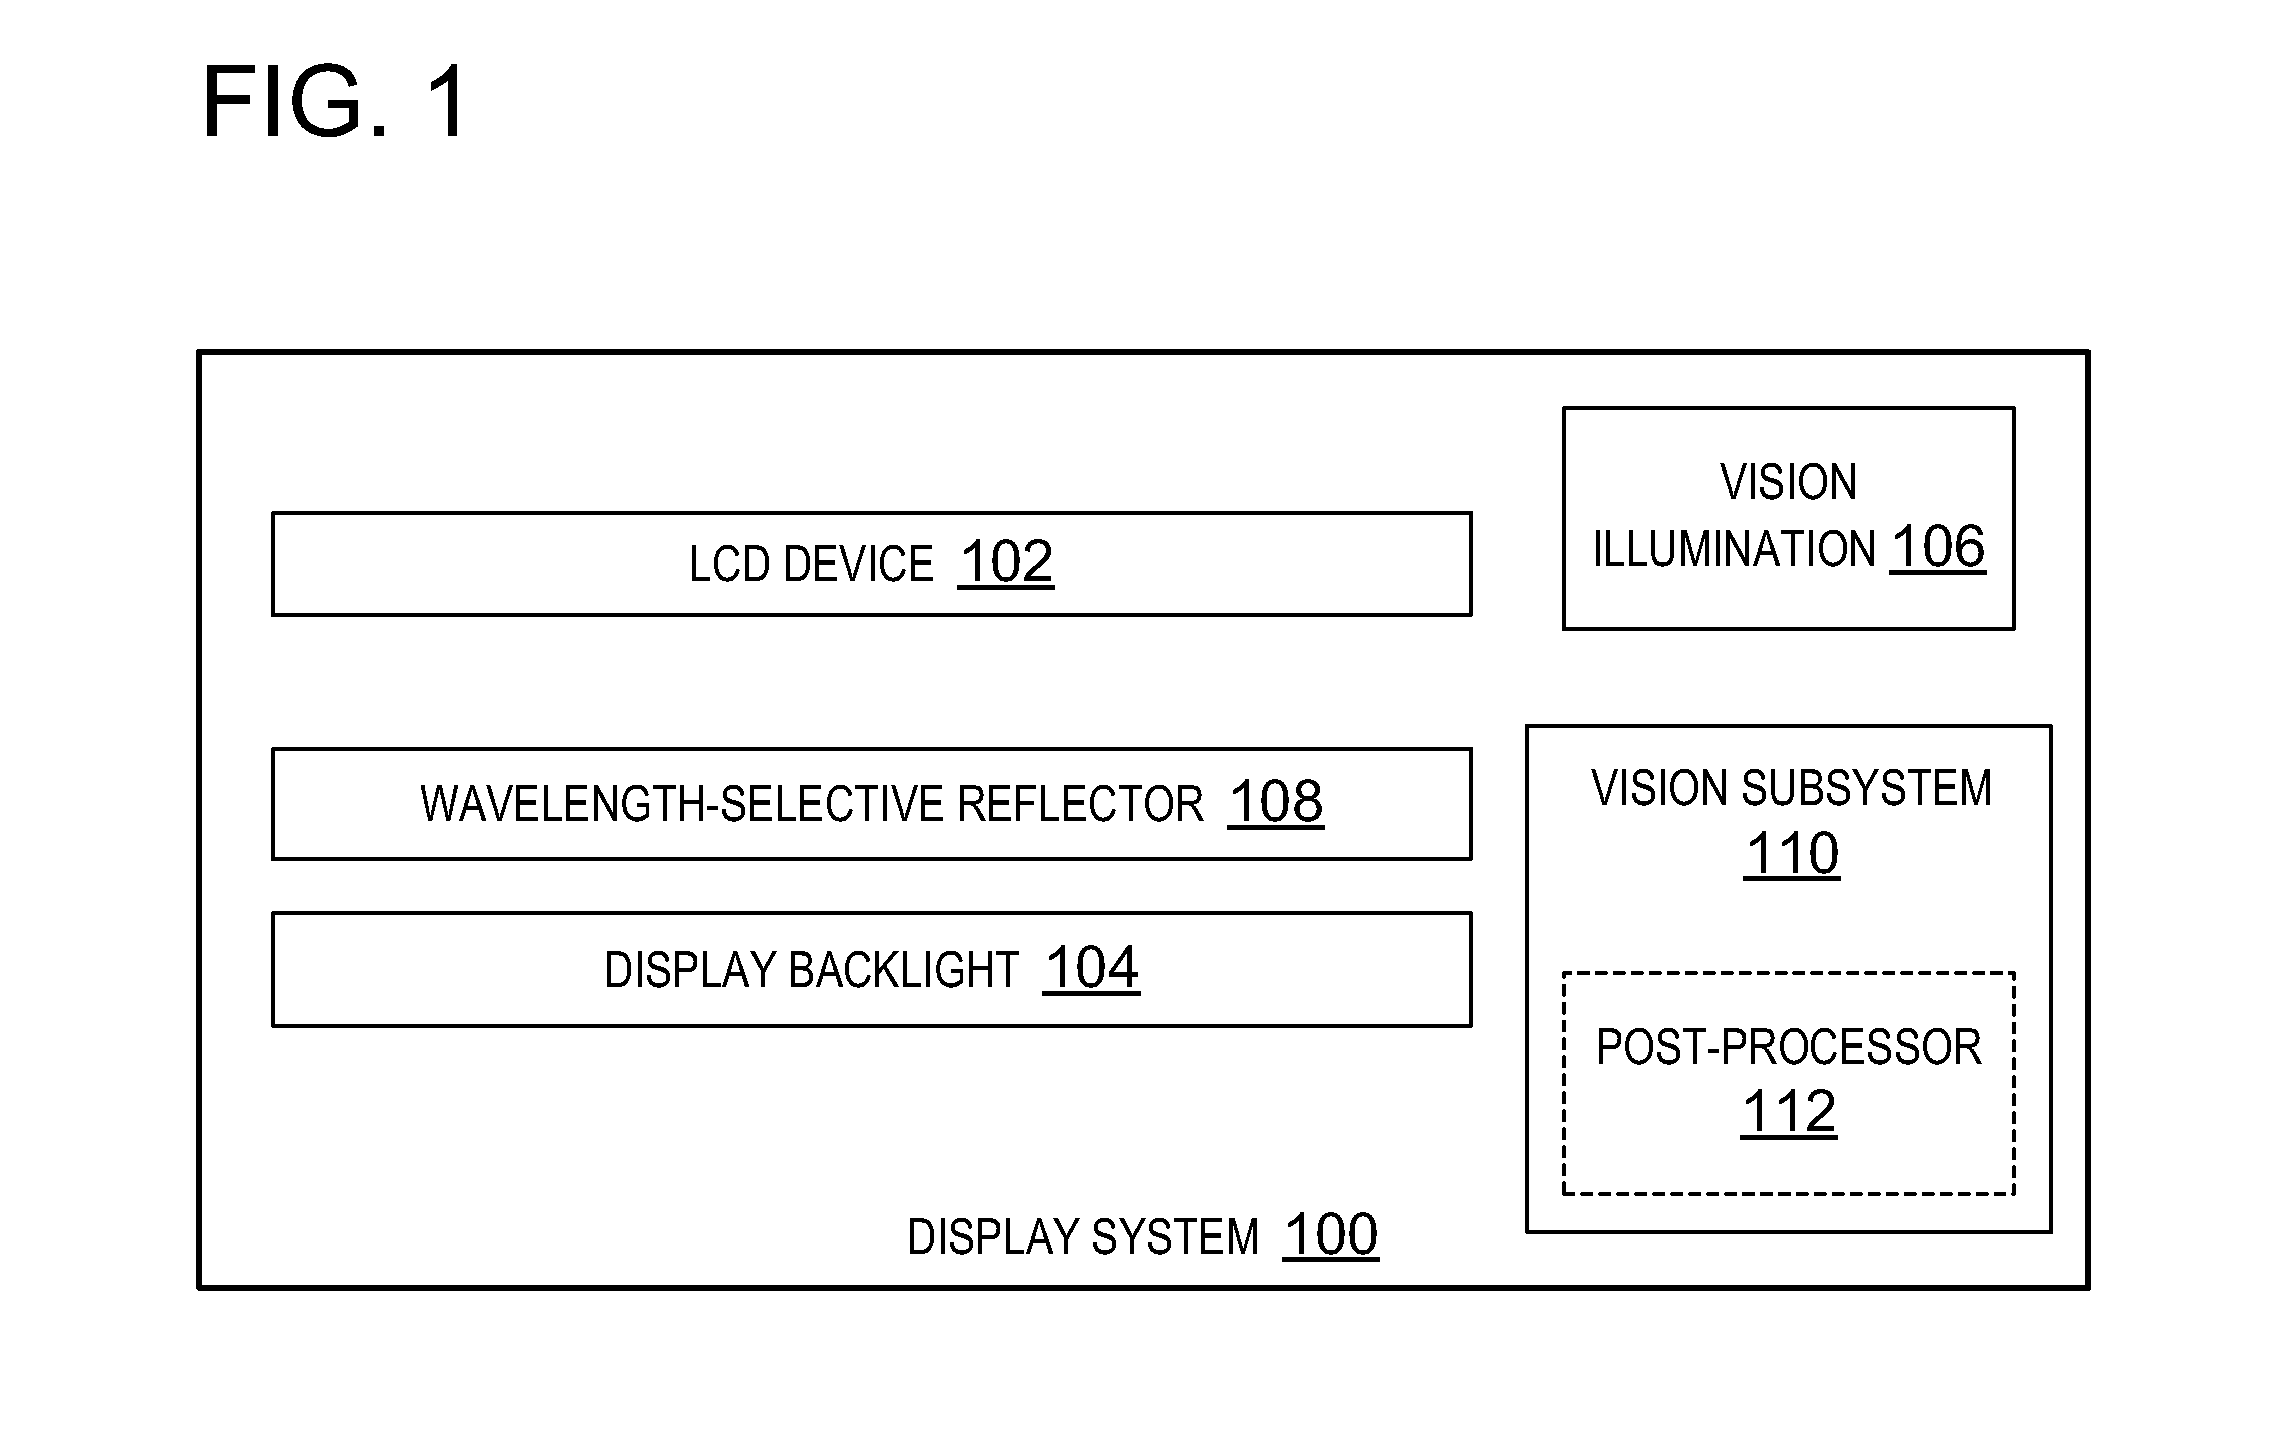 Infrared vision with liquid crystal display device